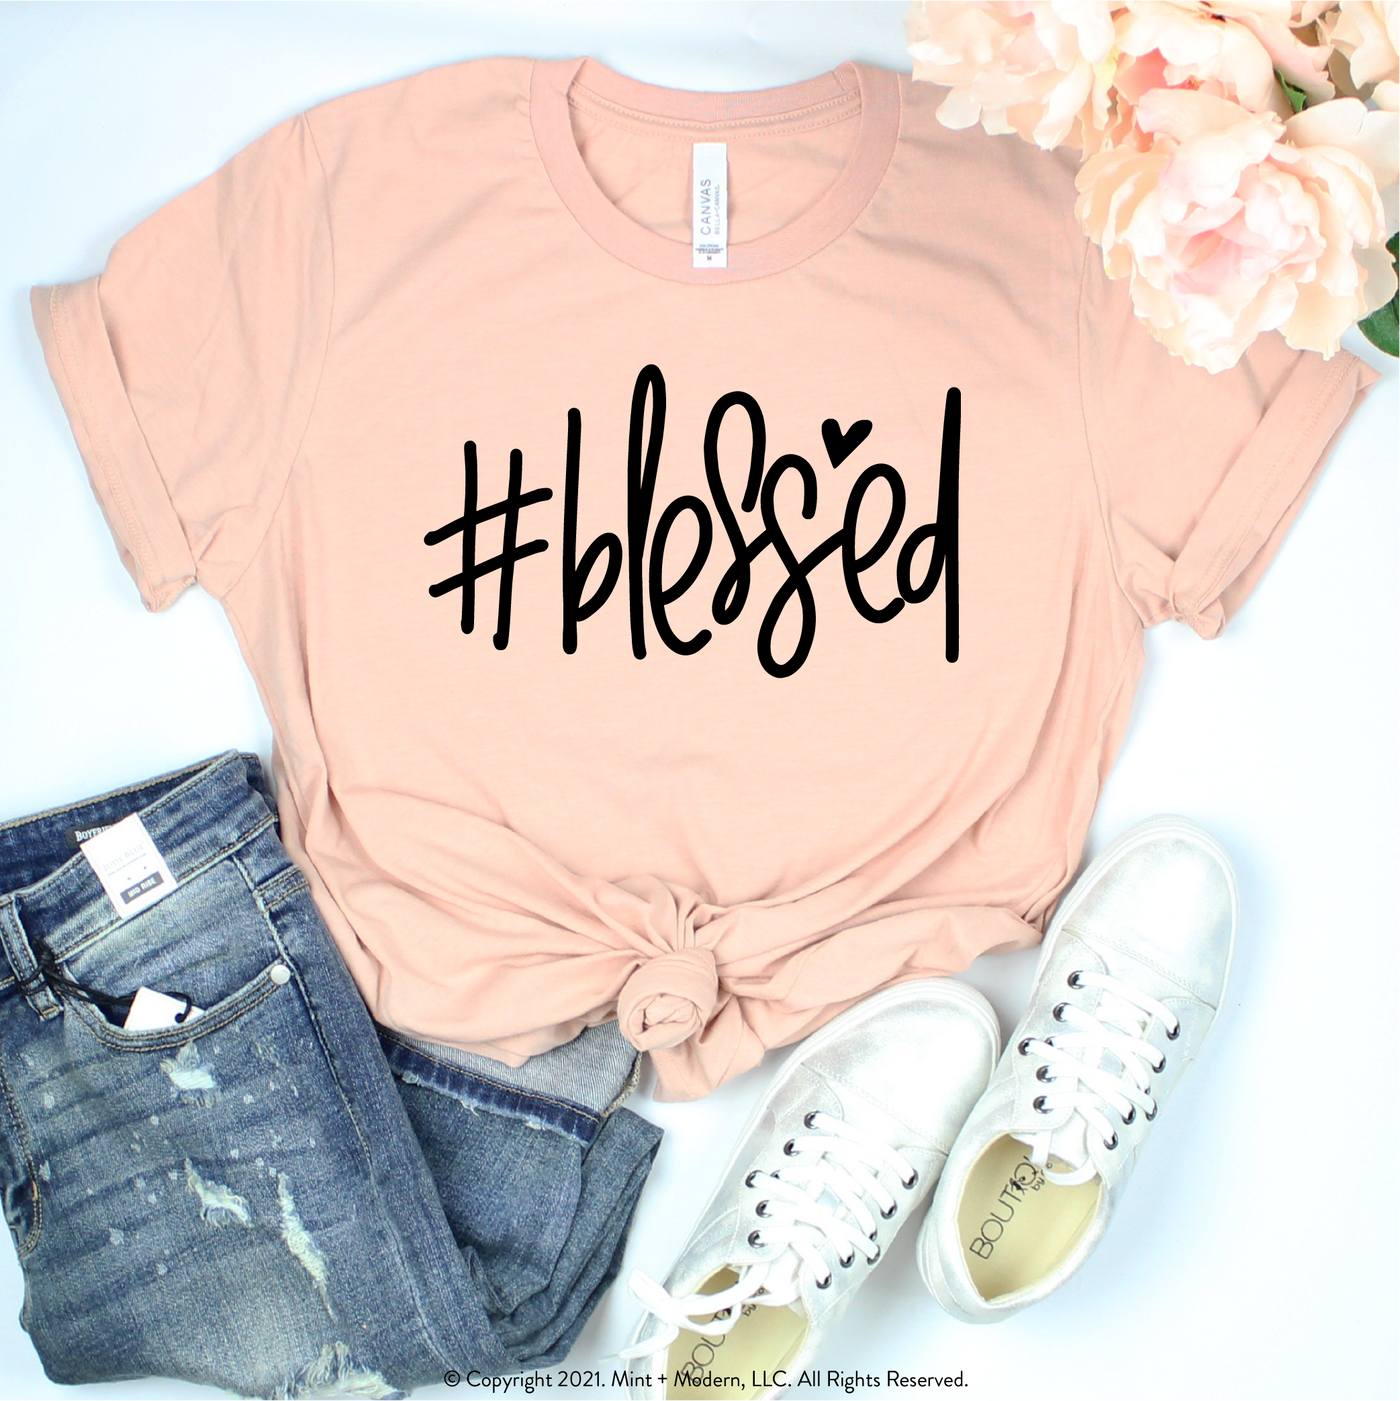 Blessed Tee Shirt - #Blessed Shirt